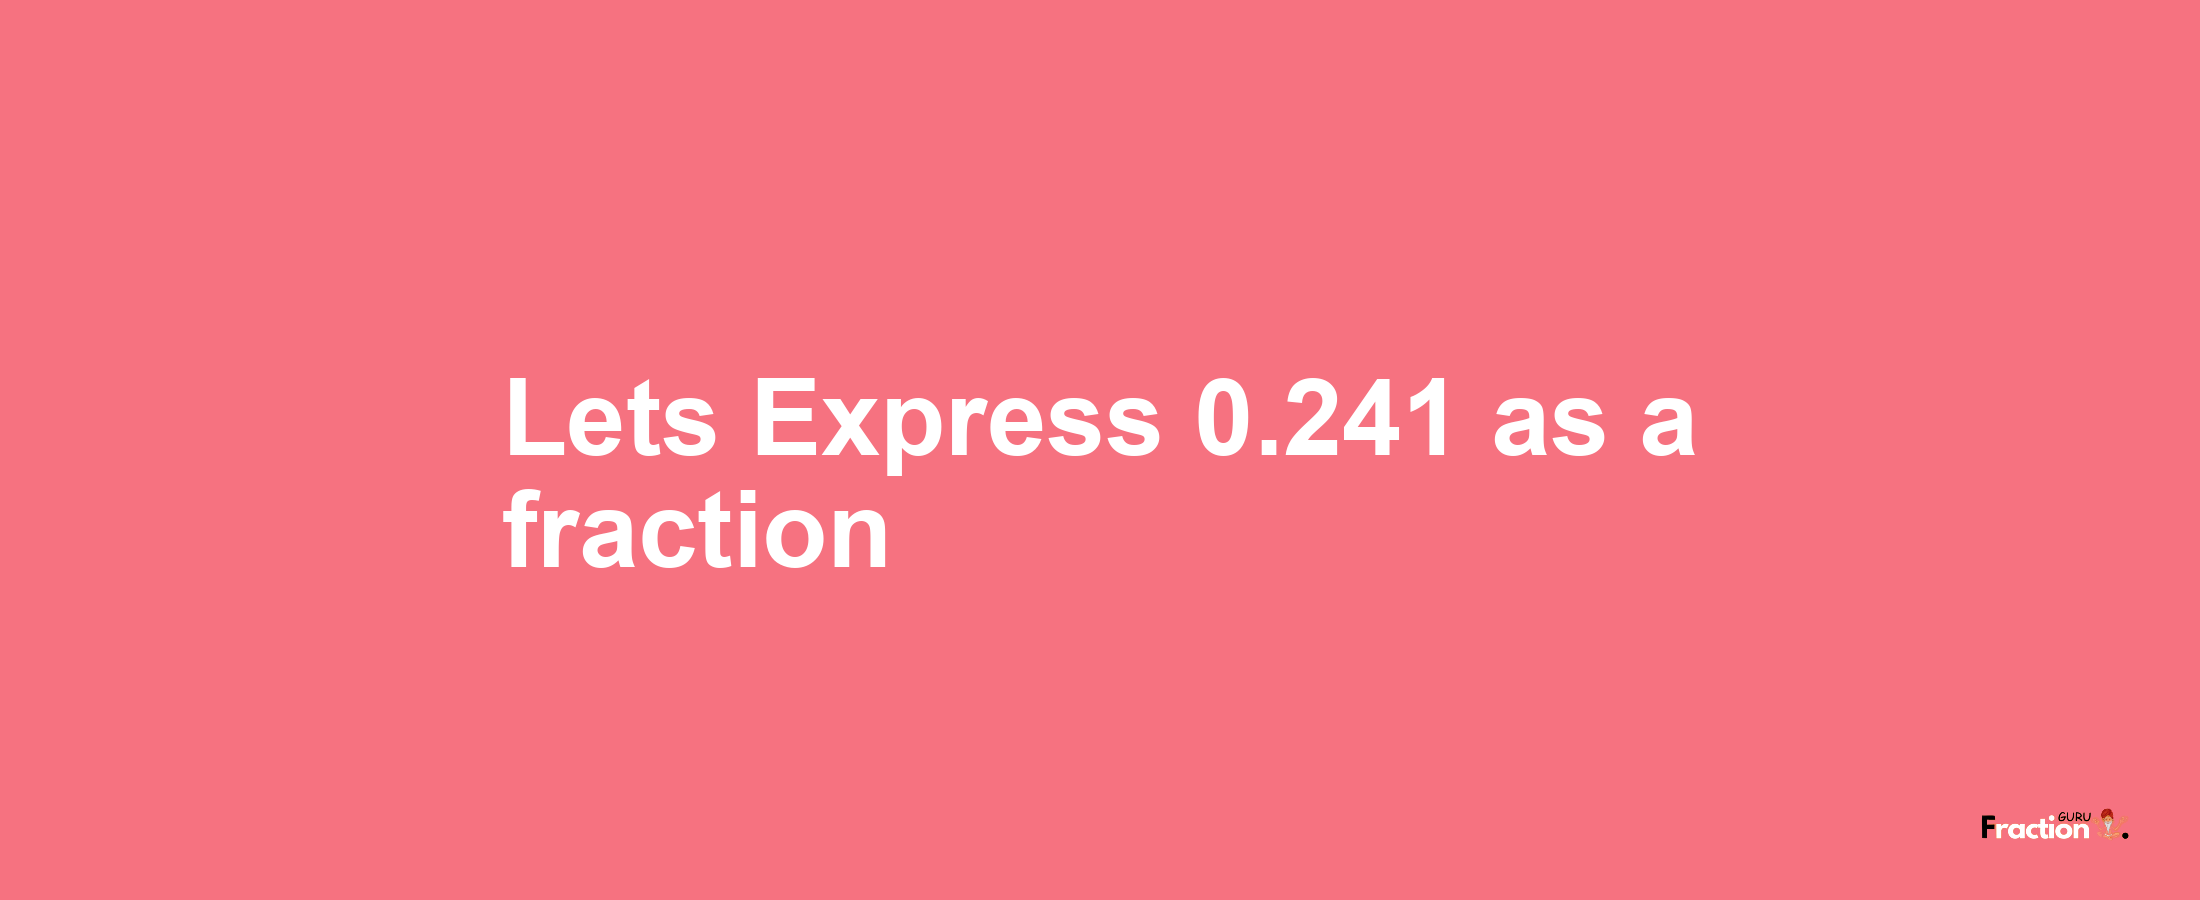 Lets Express 0.241 as afraction